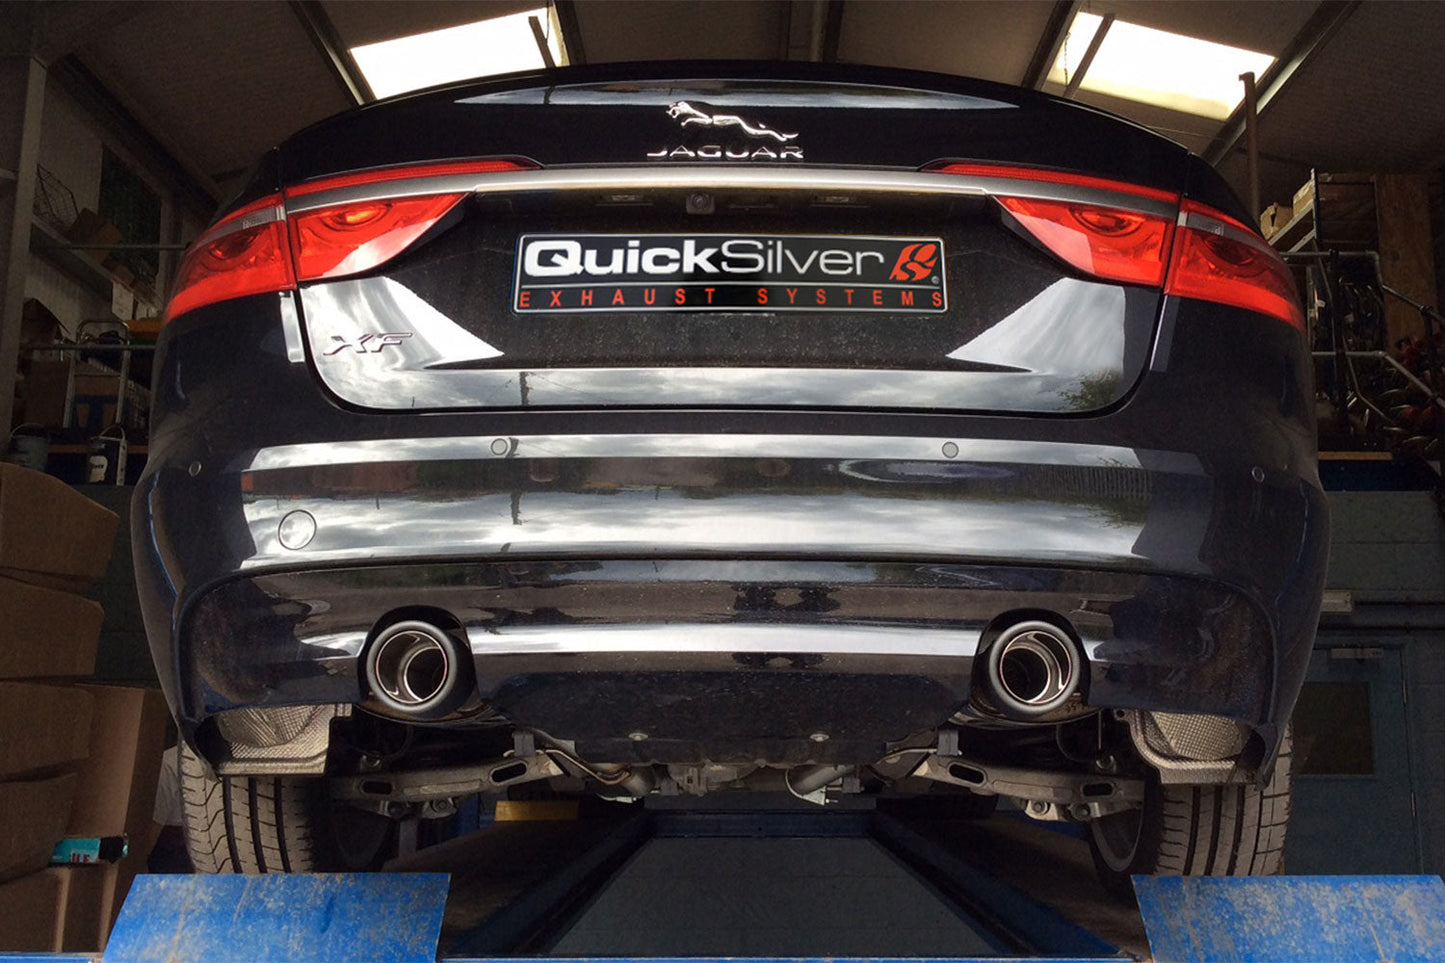 Jaguar XF 3.0 Super Charged Sport Exhaust (2016 on) - QuickSilver Exhausts